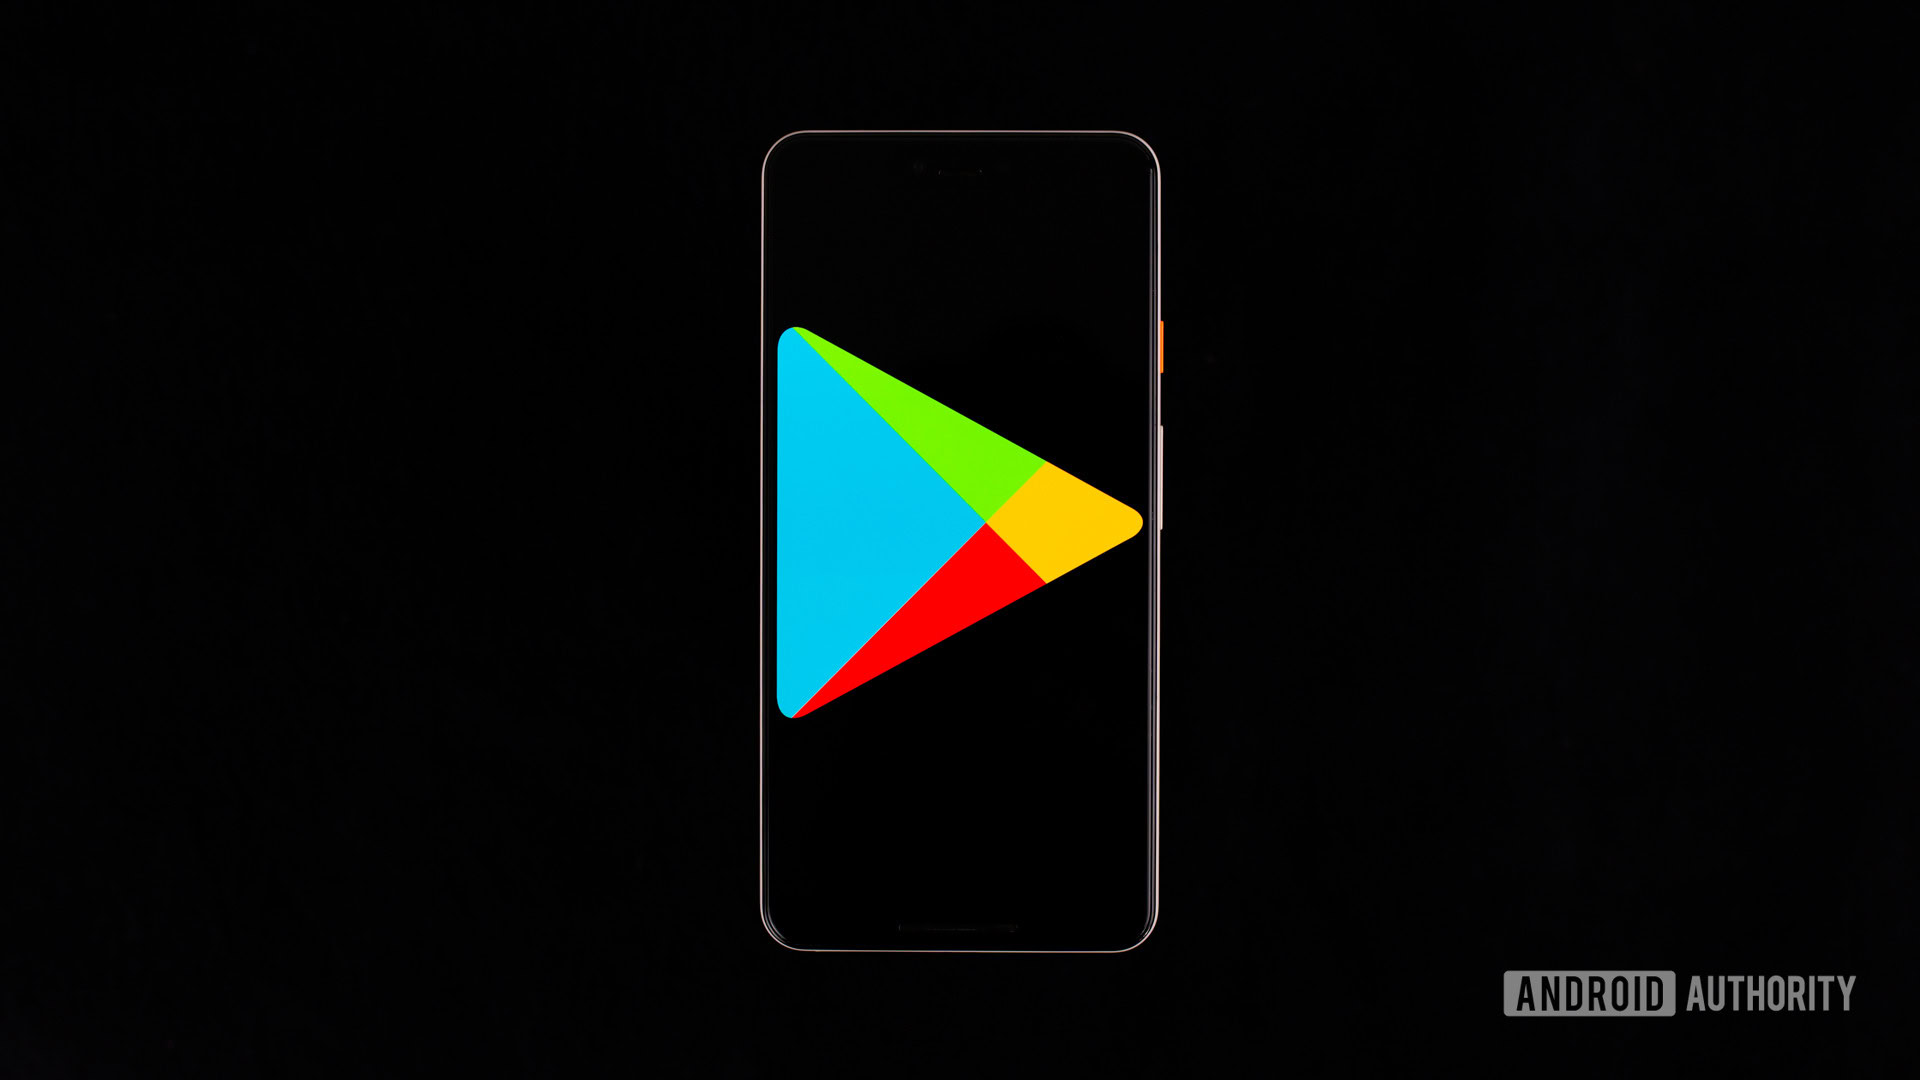 How to open Play Store on Android smartphones and tablets